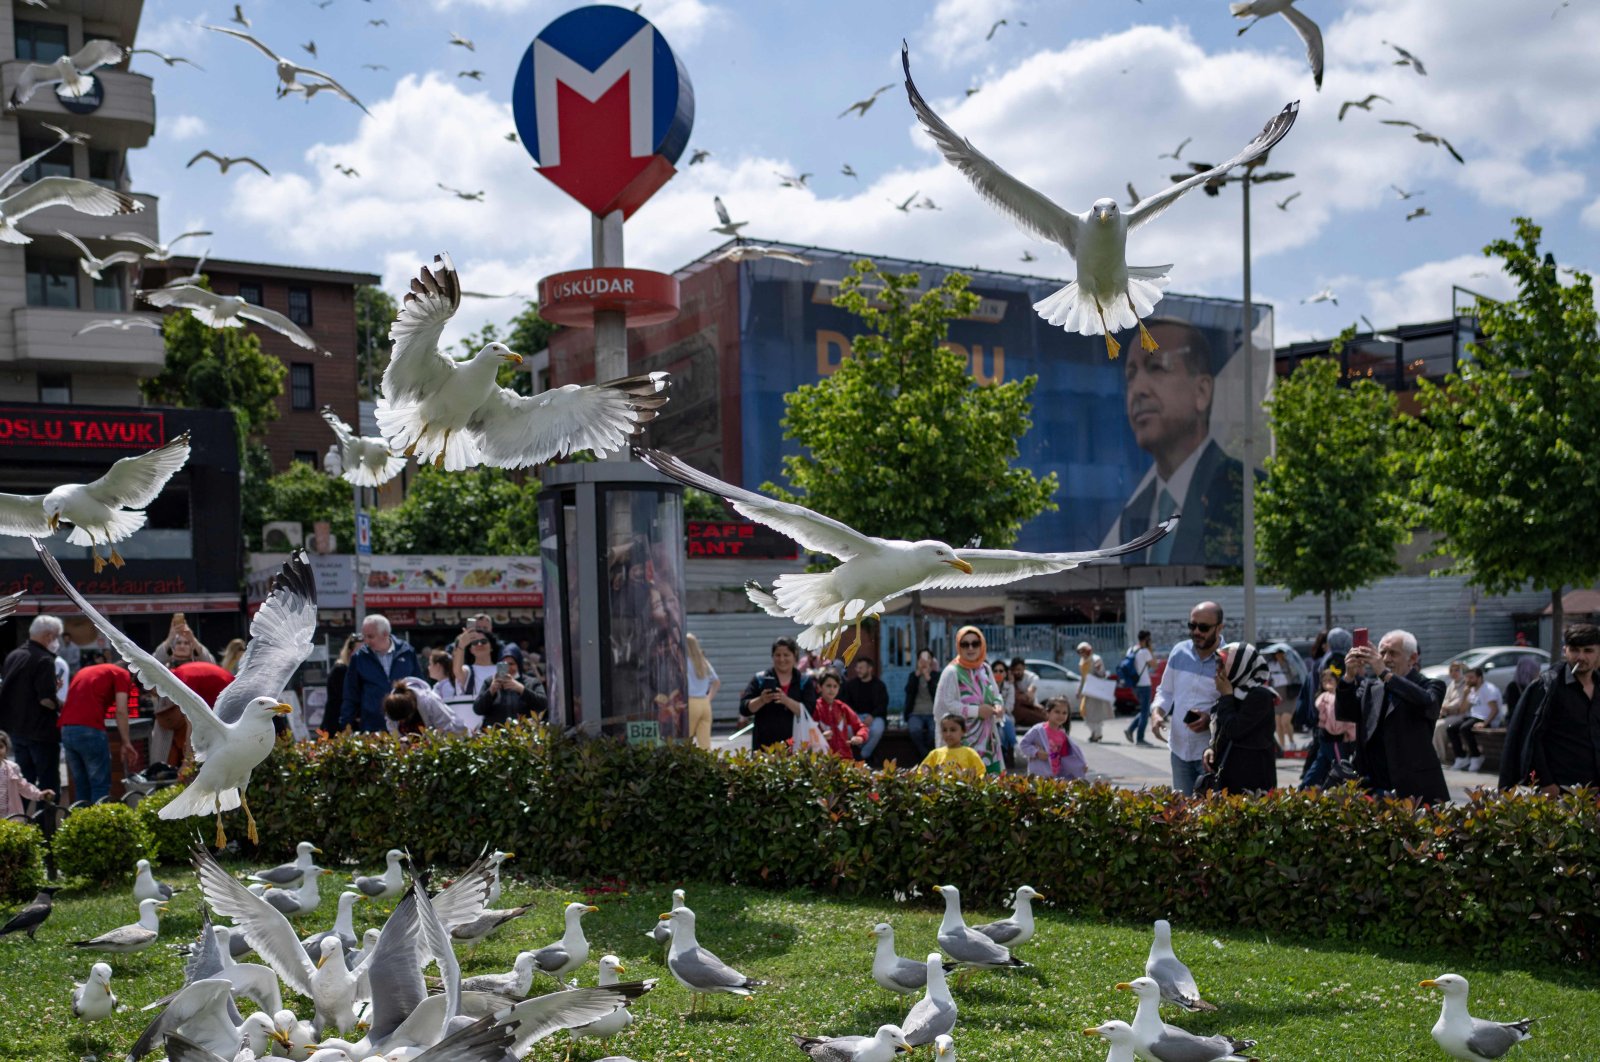 Seagulls gather on the grass close to an electoral poster bearing a portrait of President Recep Tayyip Erdoğan ahead of the May 28 presidential runoff vote, in Istanbul, Türkiye, May 27, 2023. (AFP Photo)